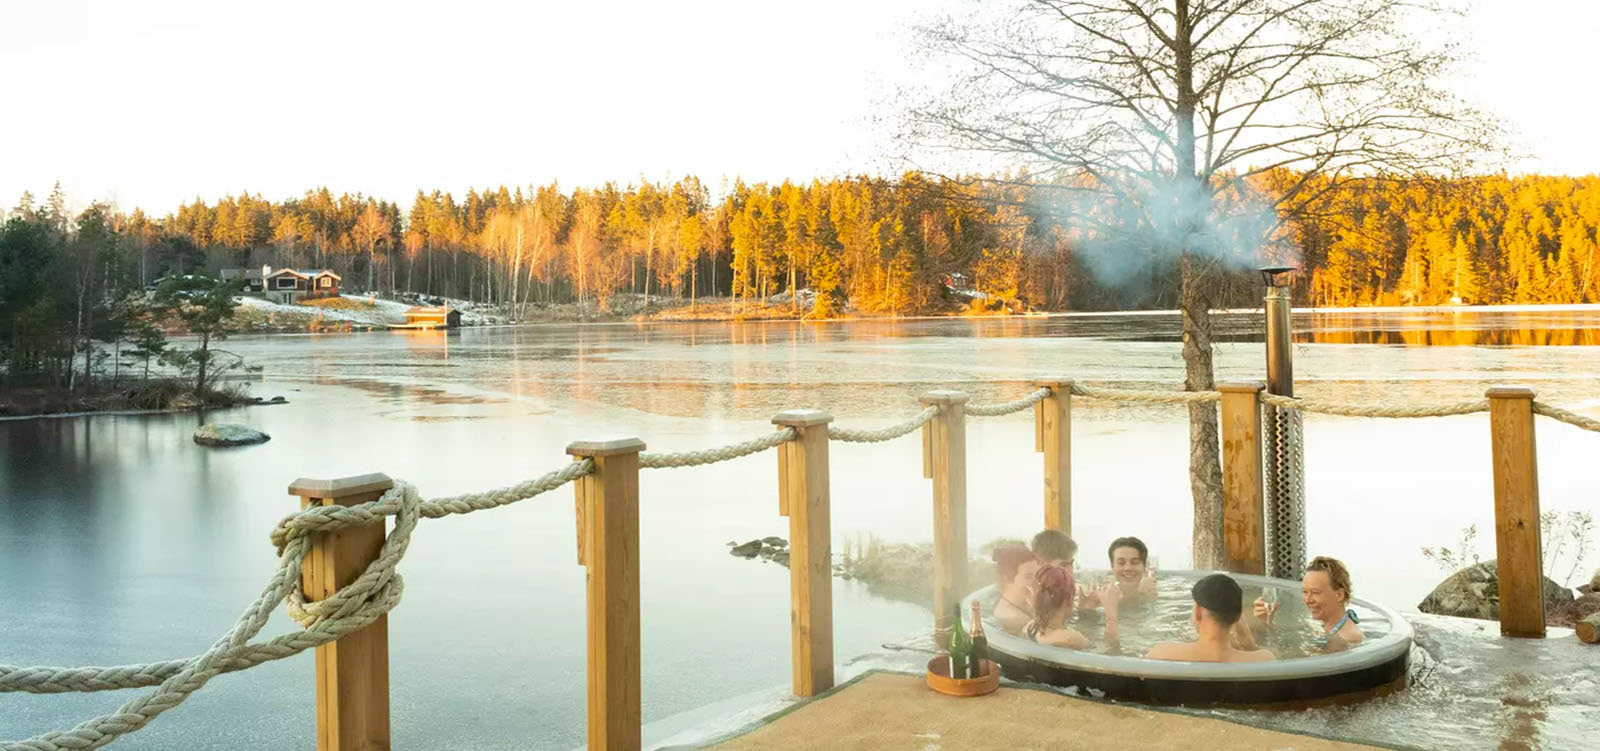 This romanic glamping lakehouse in Sweden has a sauna and jacuzzi